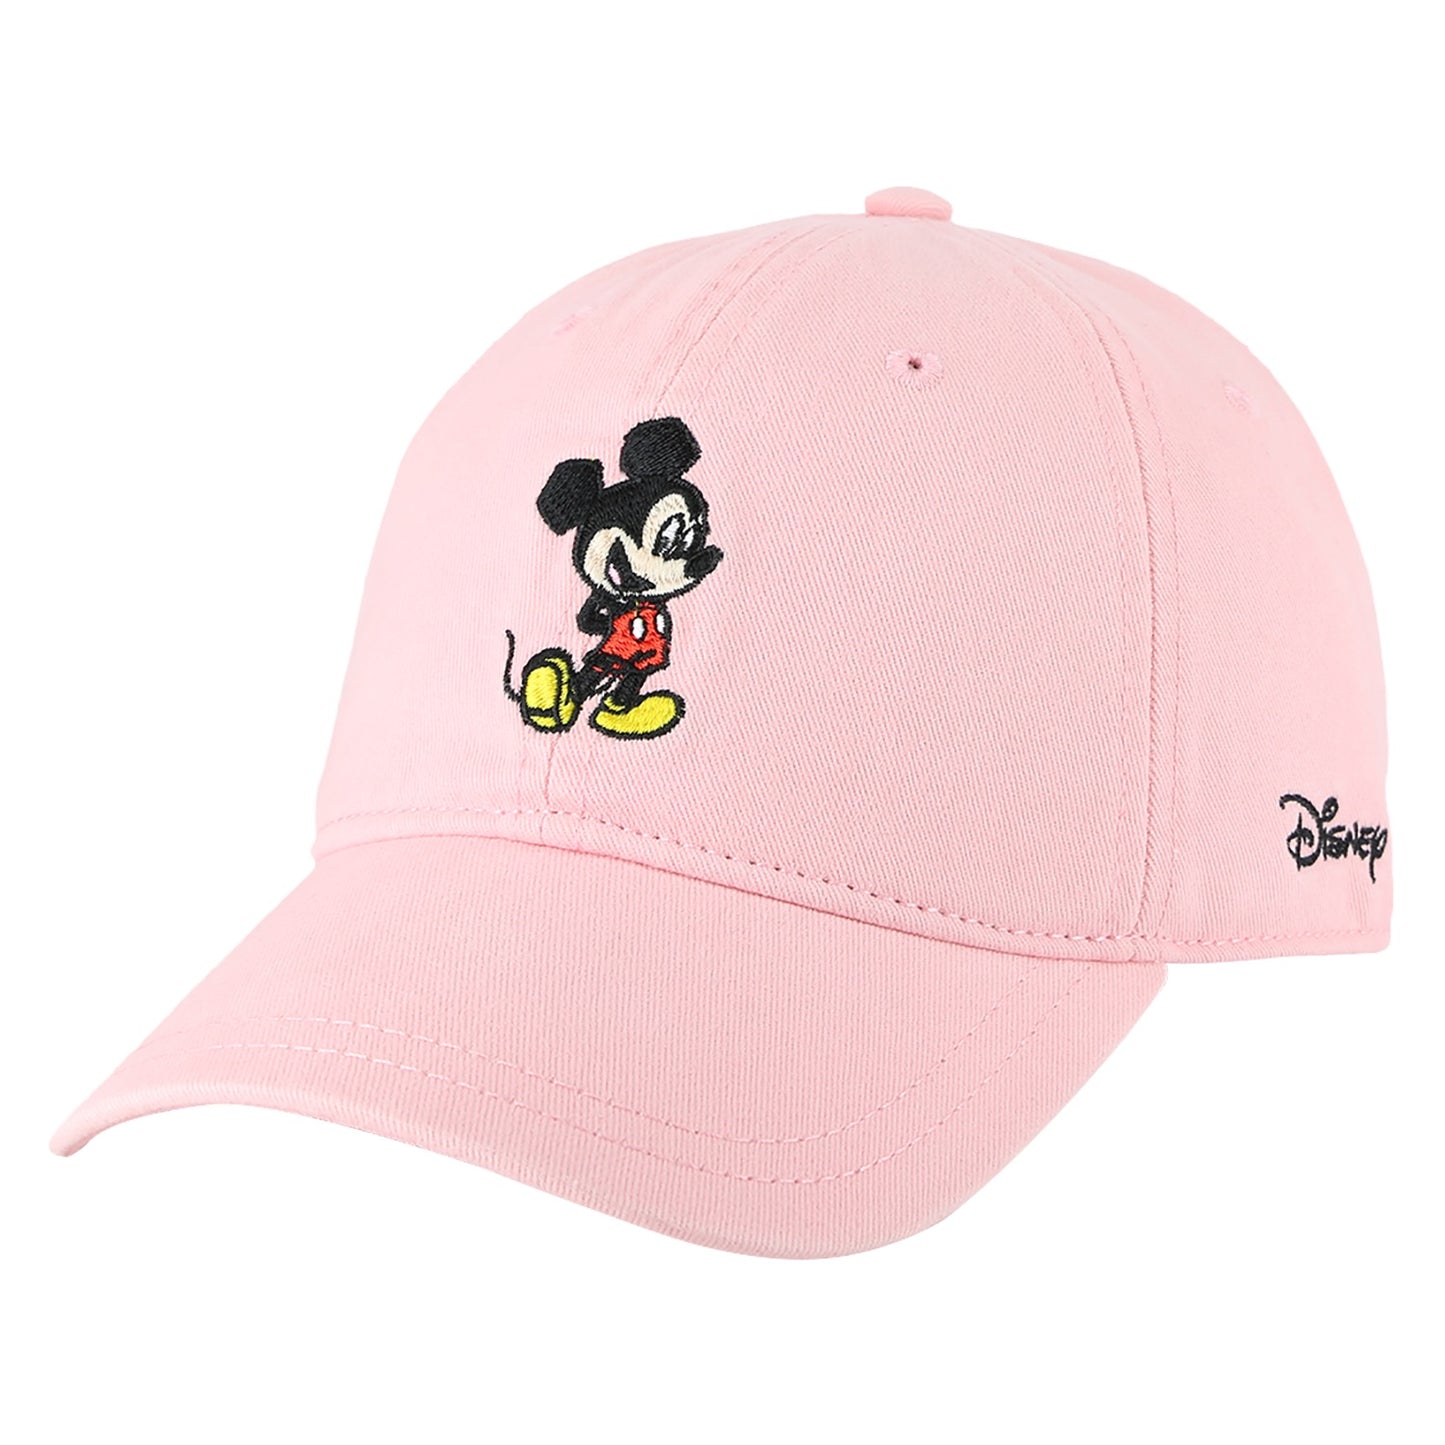 Kids Mickey Mouse Baseball Cap in Royal Blue